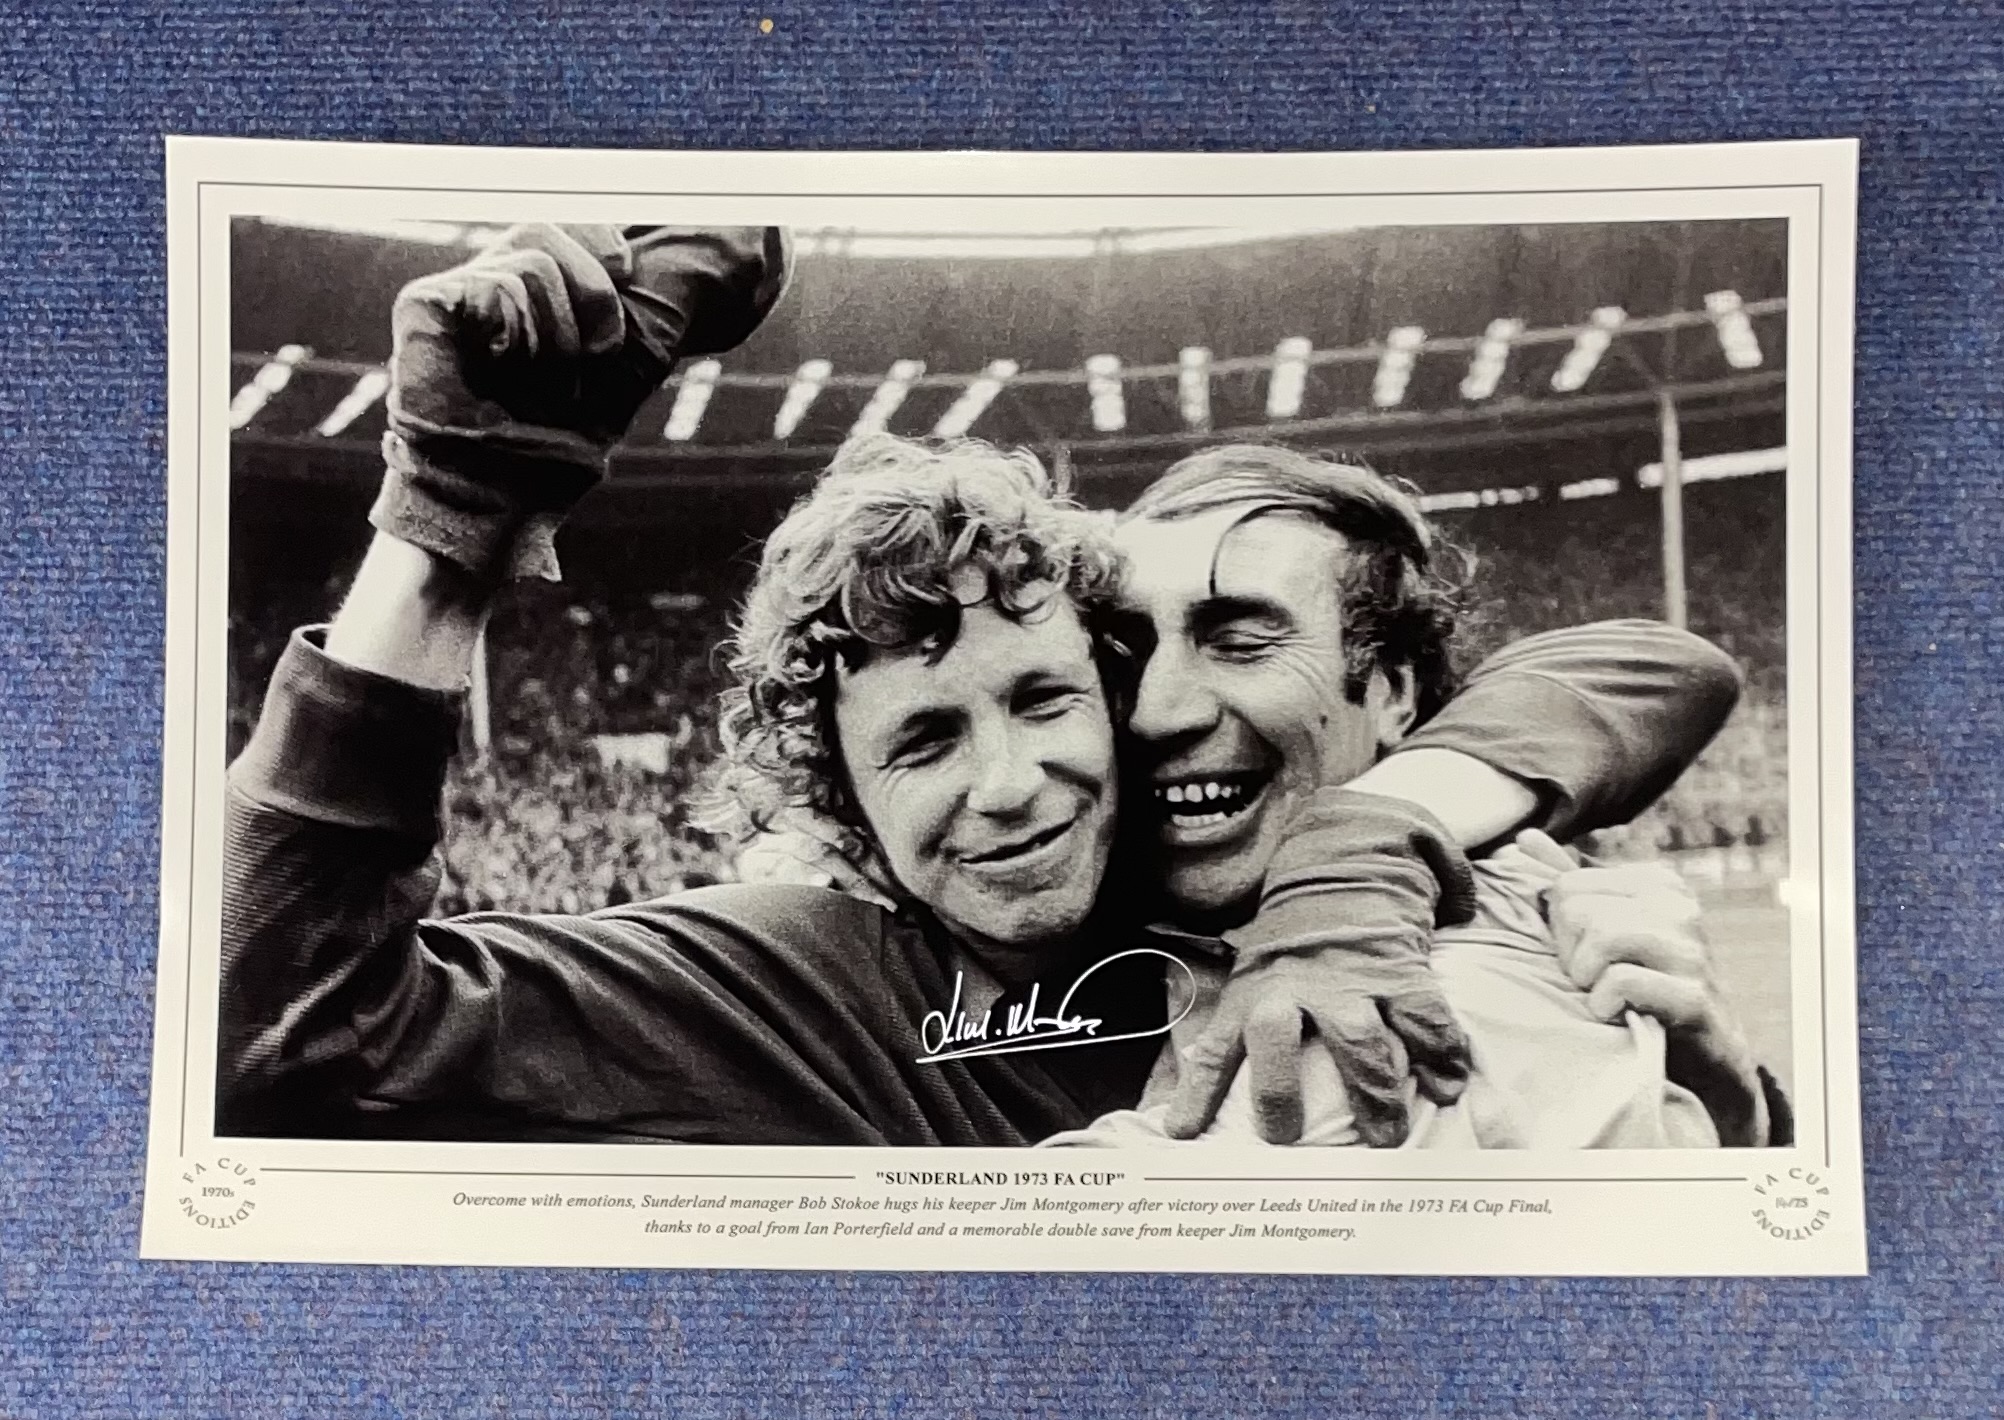 Jim Montgomery signed Sunderland 1973 FA Cup 16x12 black and white print. Overcome with emotion ,